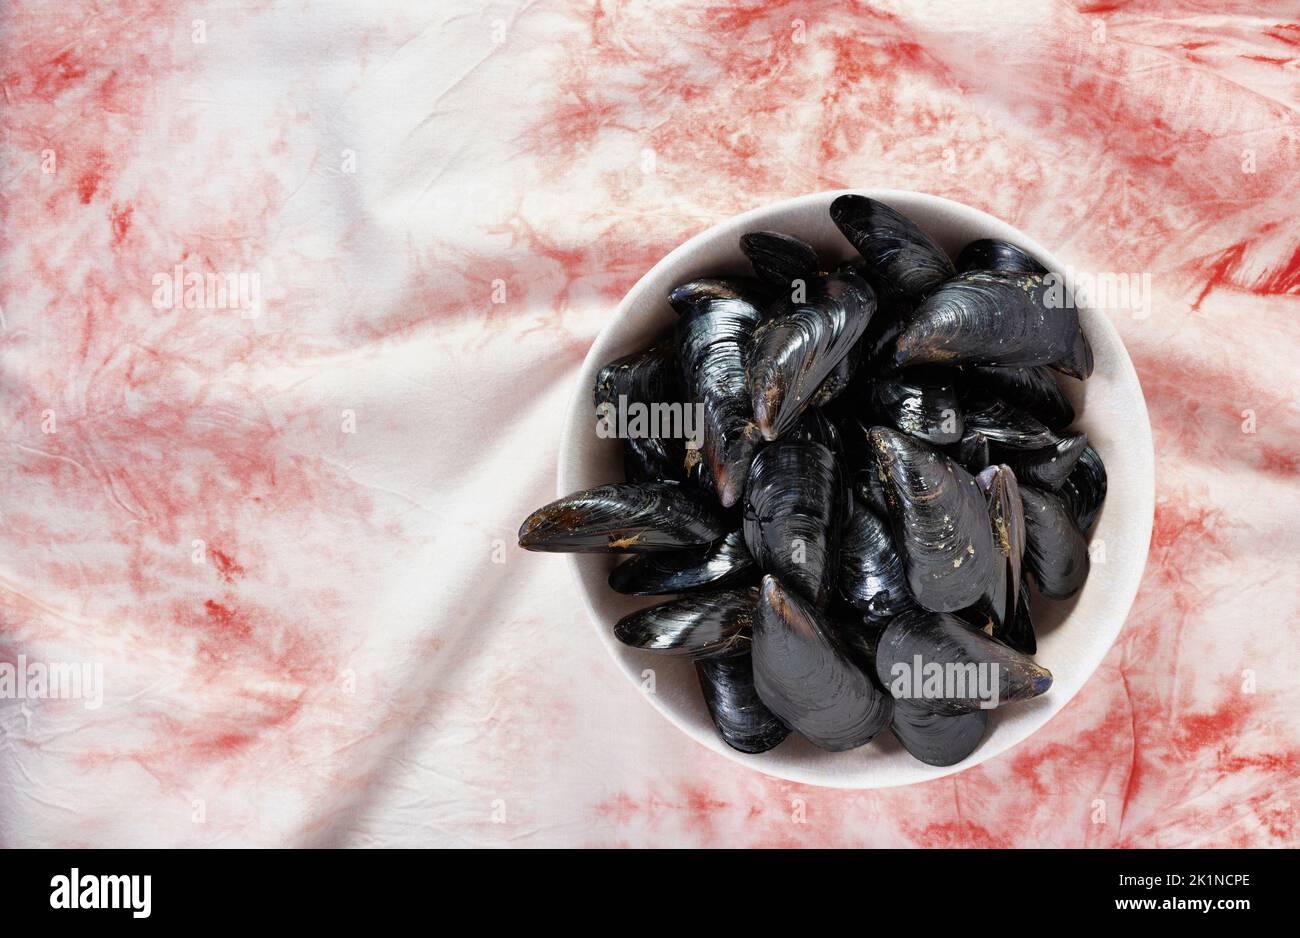 Heap of mussels in white plate , preparing healthy eating food Stock Photo